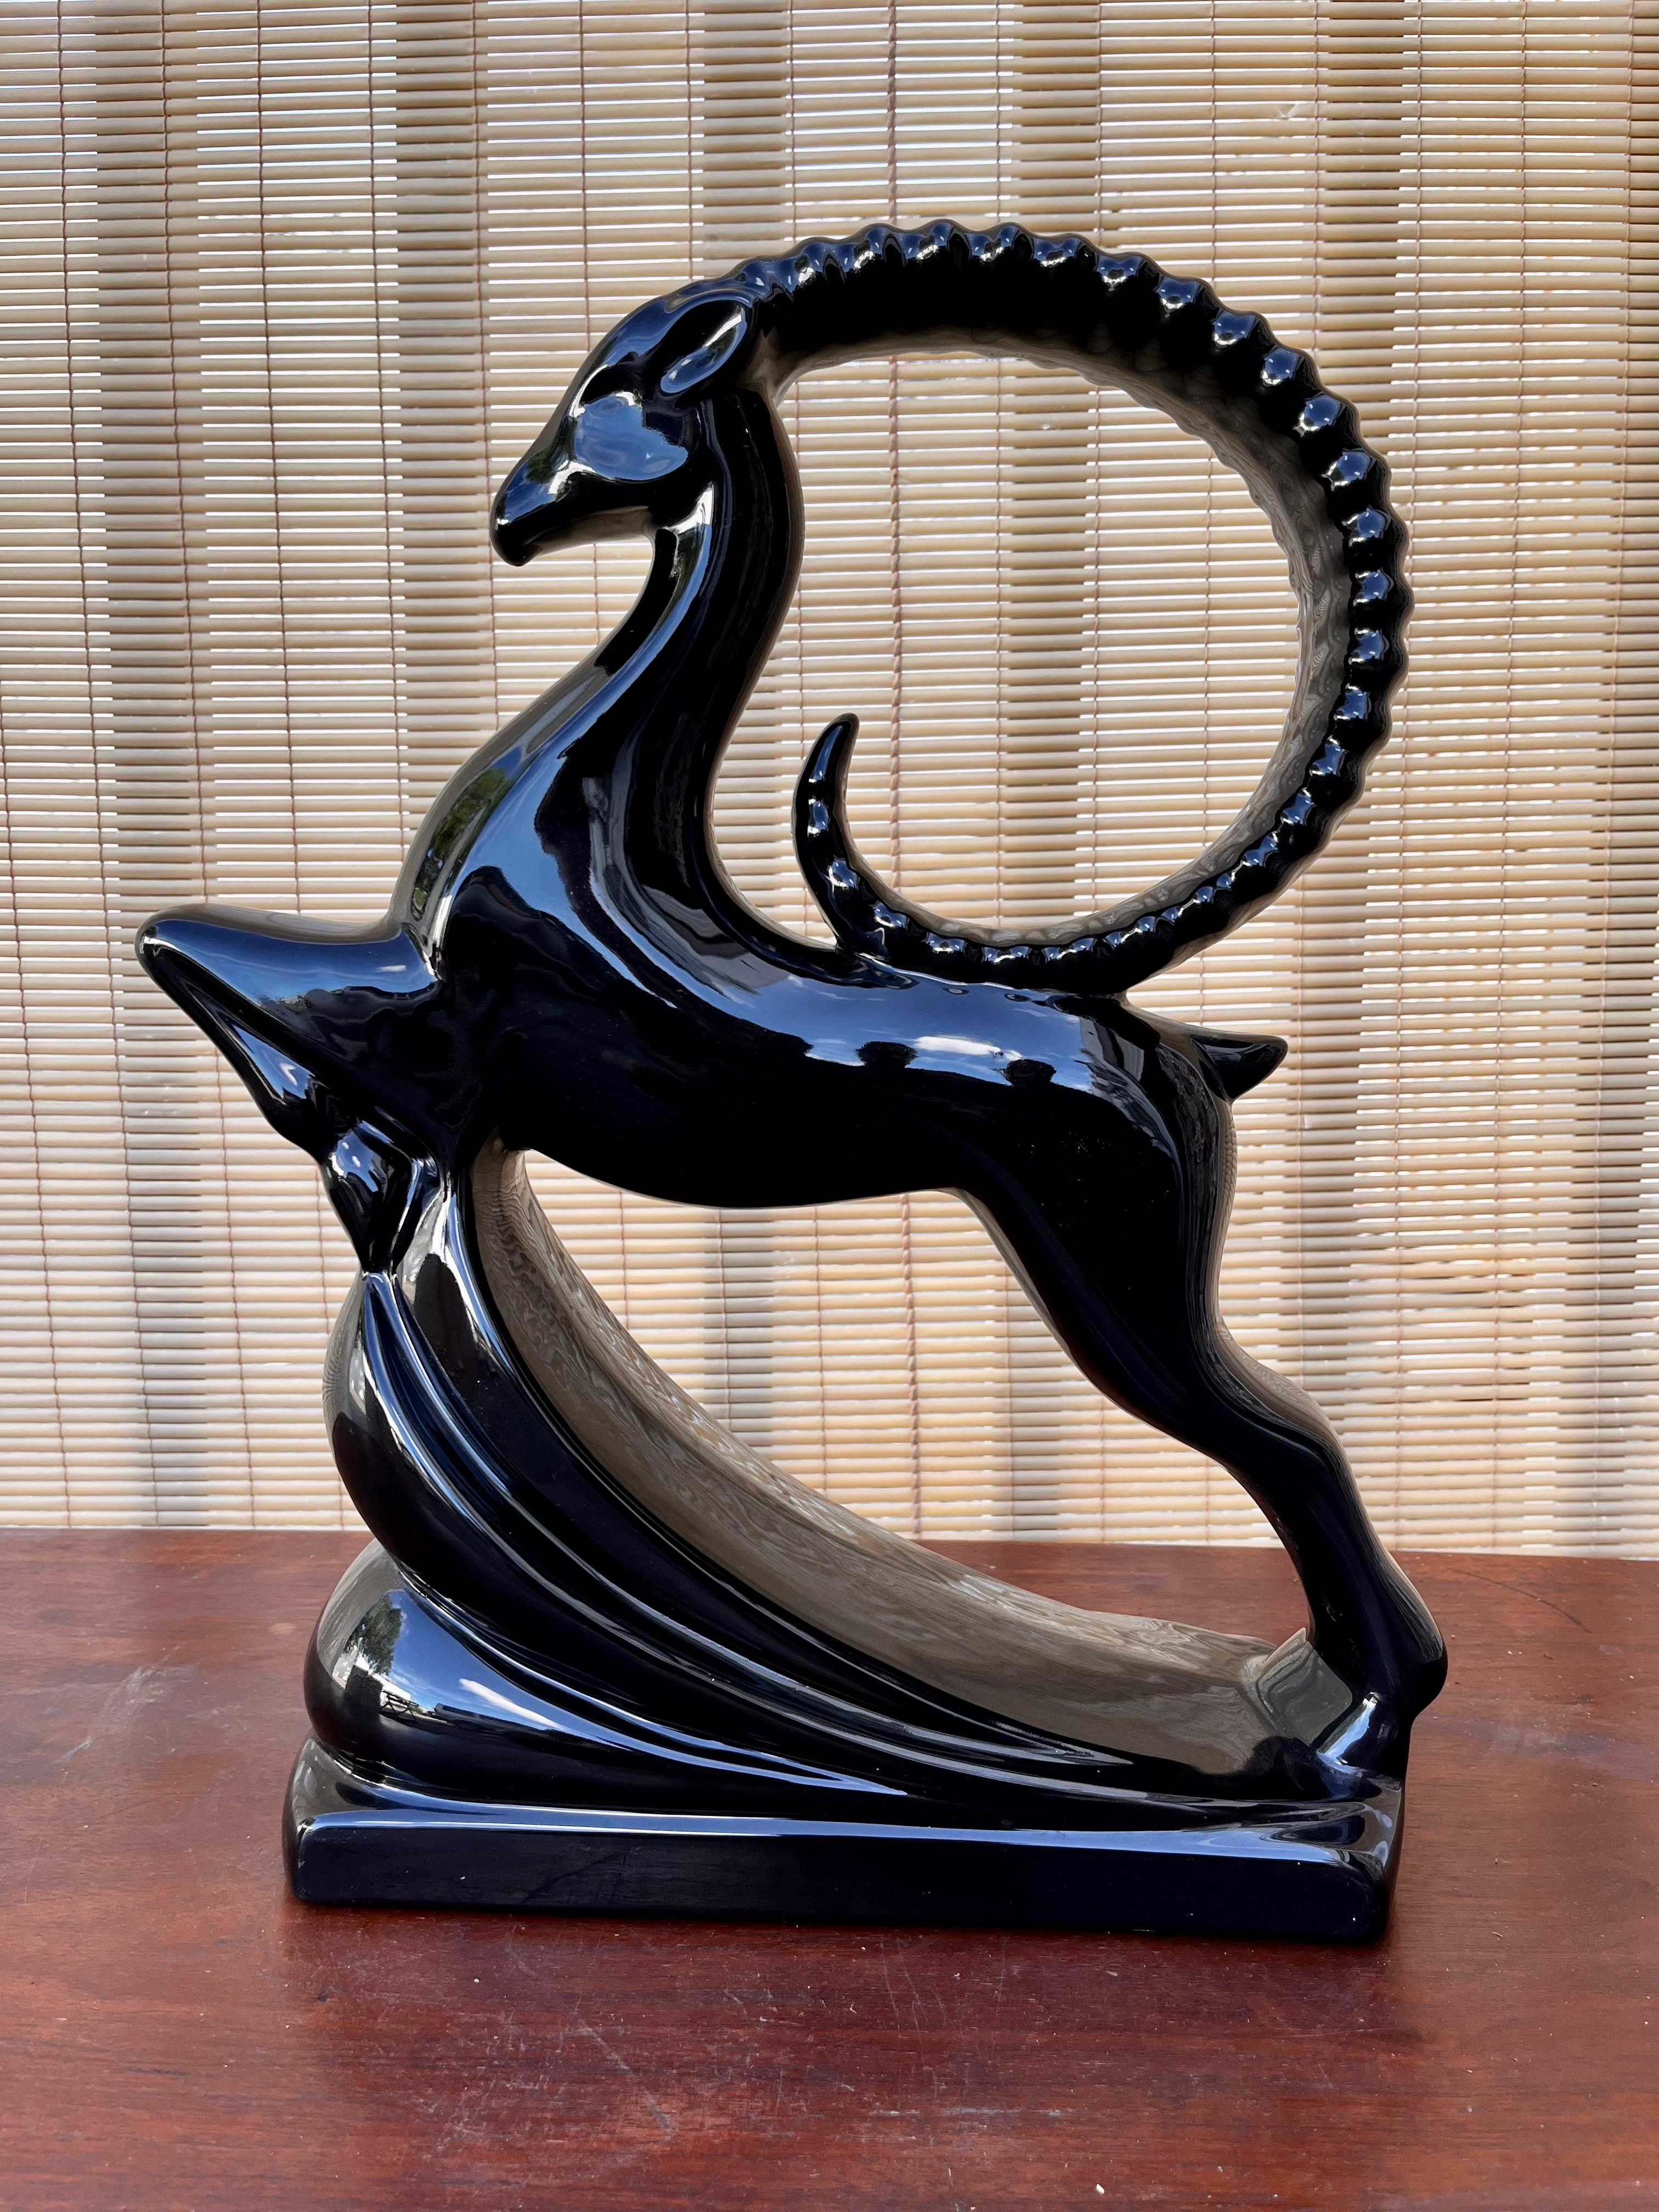 Large 1980s Art Deco Revival Royal Haeger black leaping Gazelle Figurine. circa 1980s 
Features a large size hollow molded gazelle image with a high gloss black glaze finish in an Art Deco inspired Style. 
In excellent near mint original